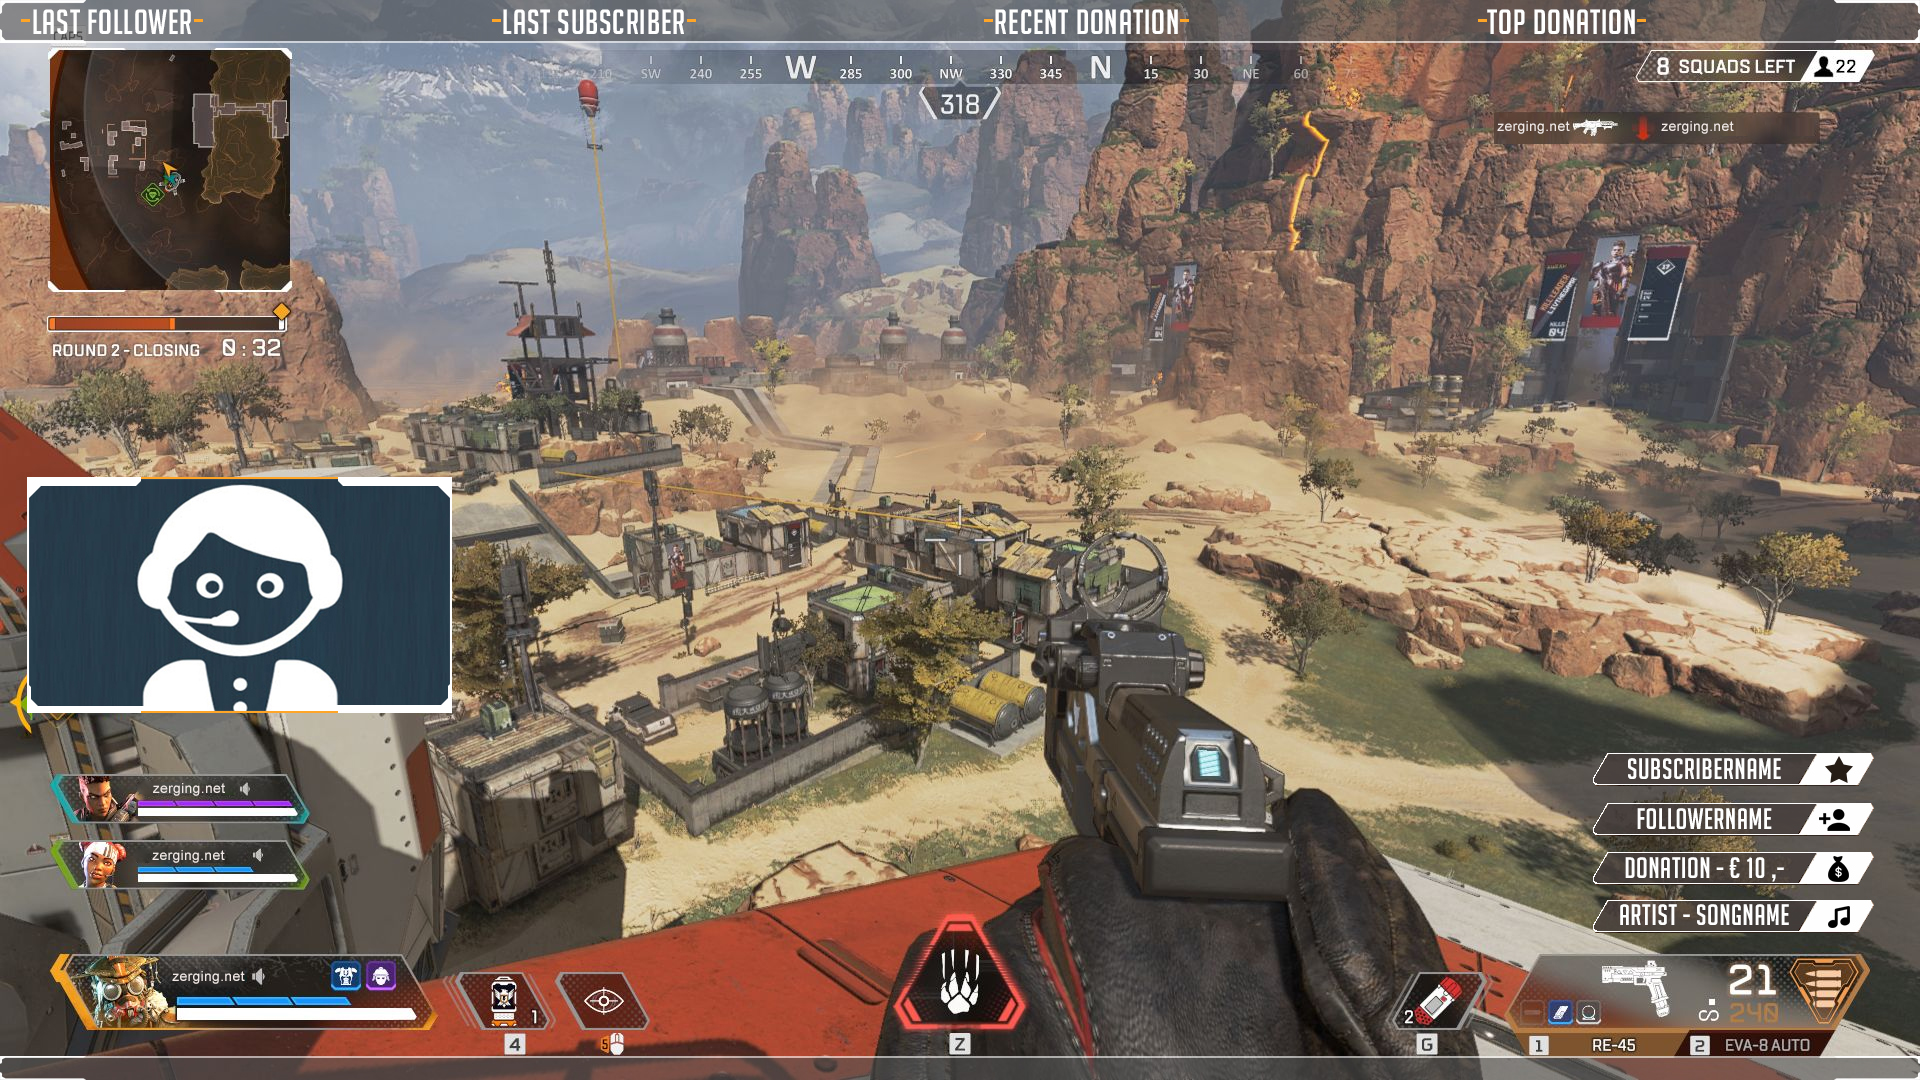 Free Apex Streaming Kit Including Offline Banner Overlays And Panels For Your Channel Apexlegends